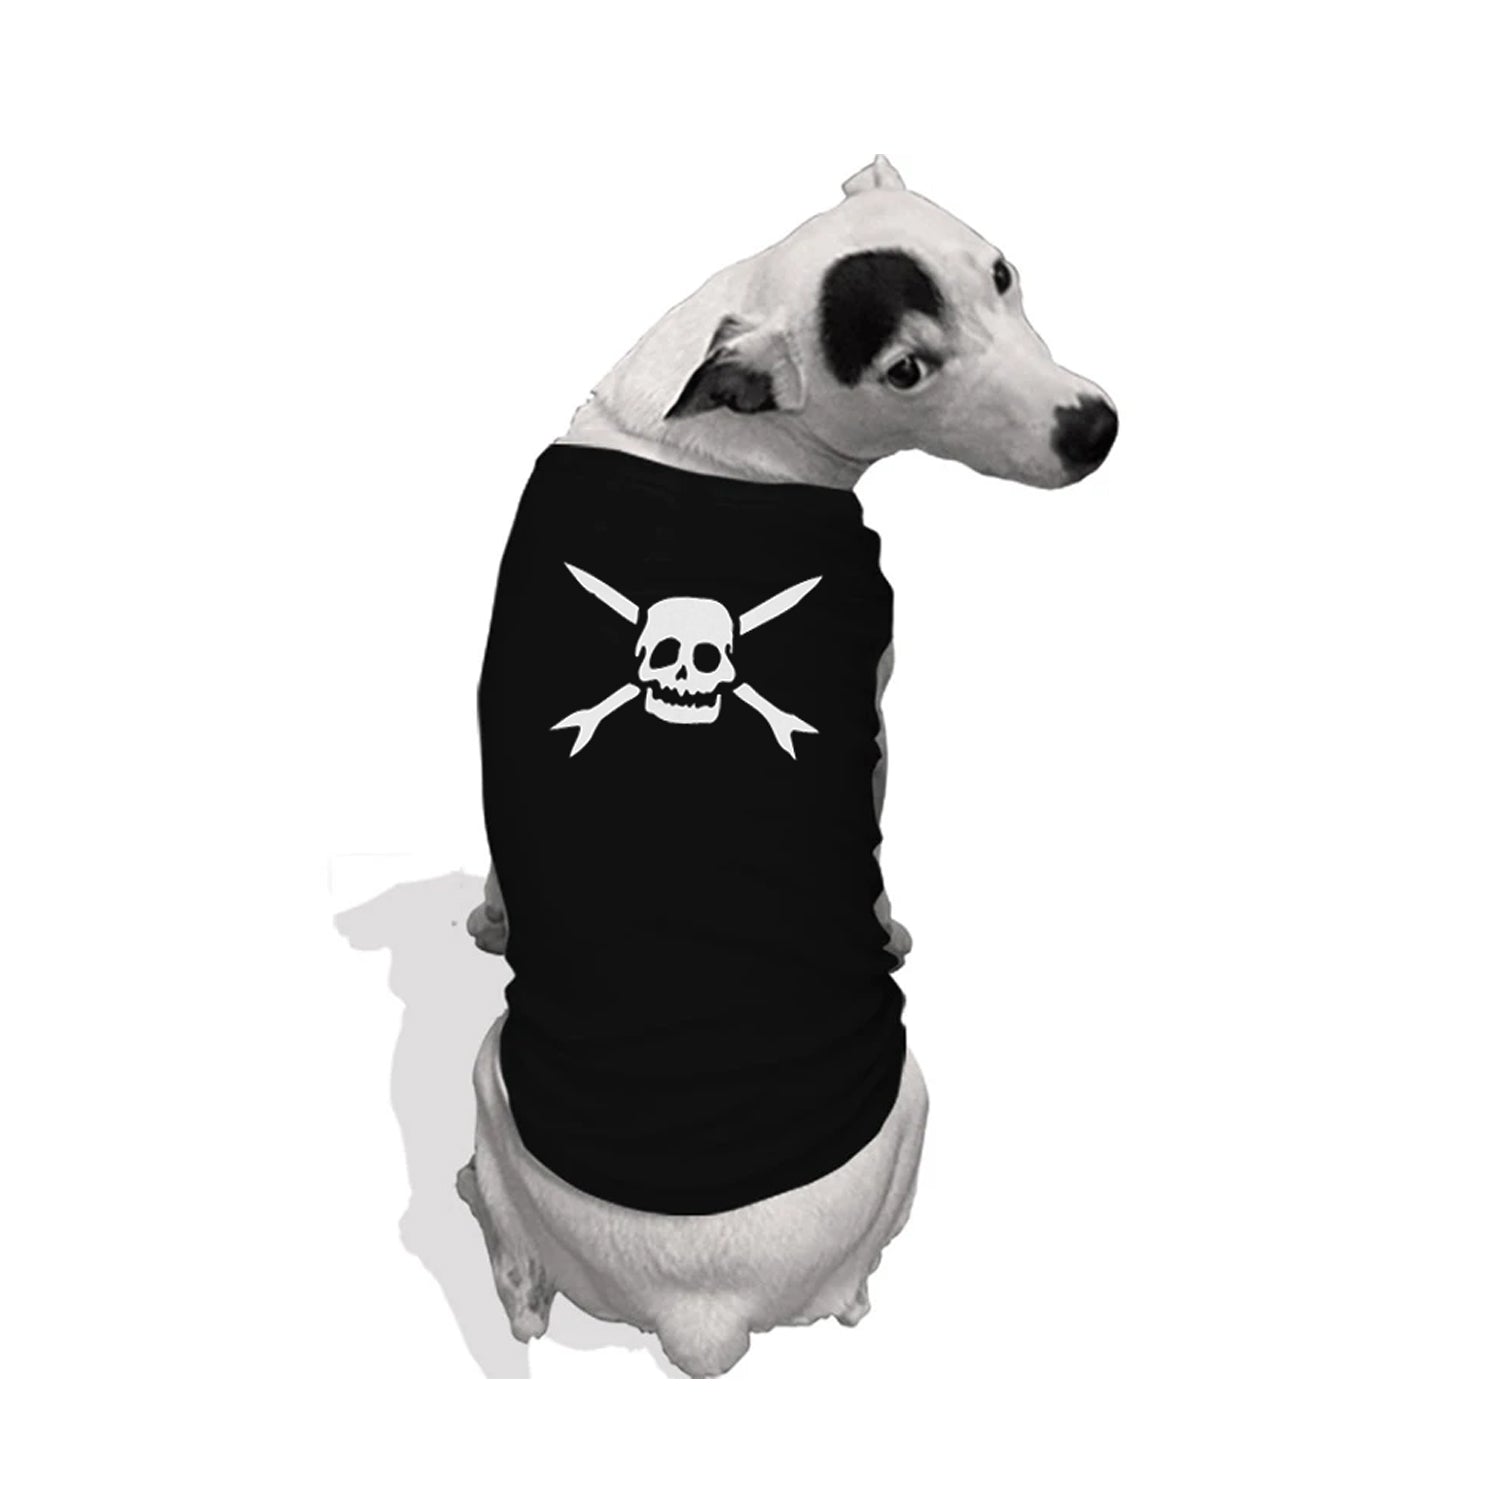 Image of a white dog with black spots on its nose, eye and ear with its back to the camera, head turned to look at the camera. The background is white. The dog is wearing a black dog tank top that features the teenage bottlerocket logo of a skull head with cross arrows in white.